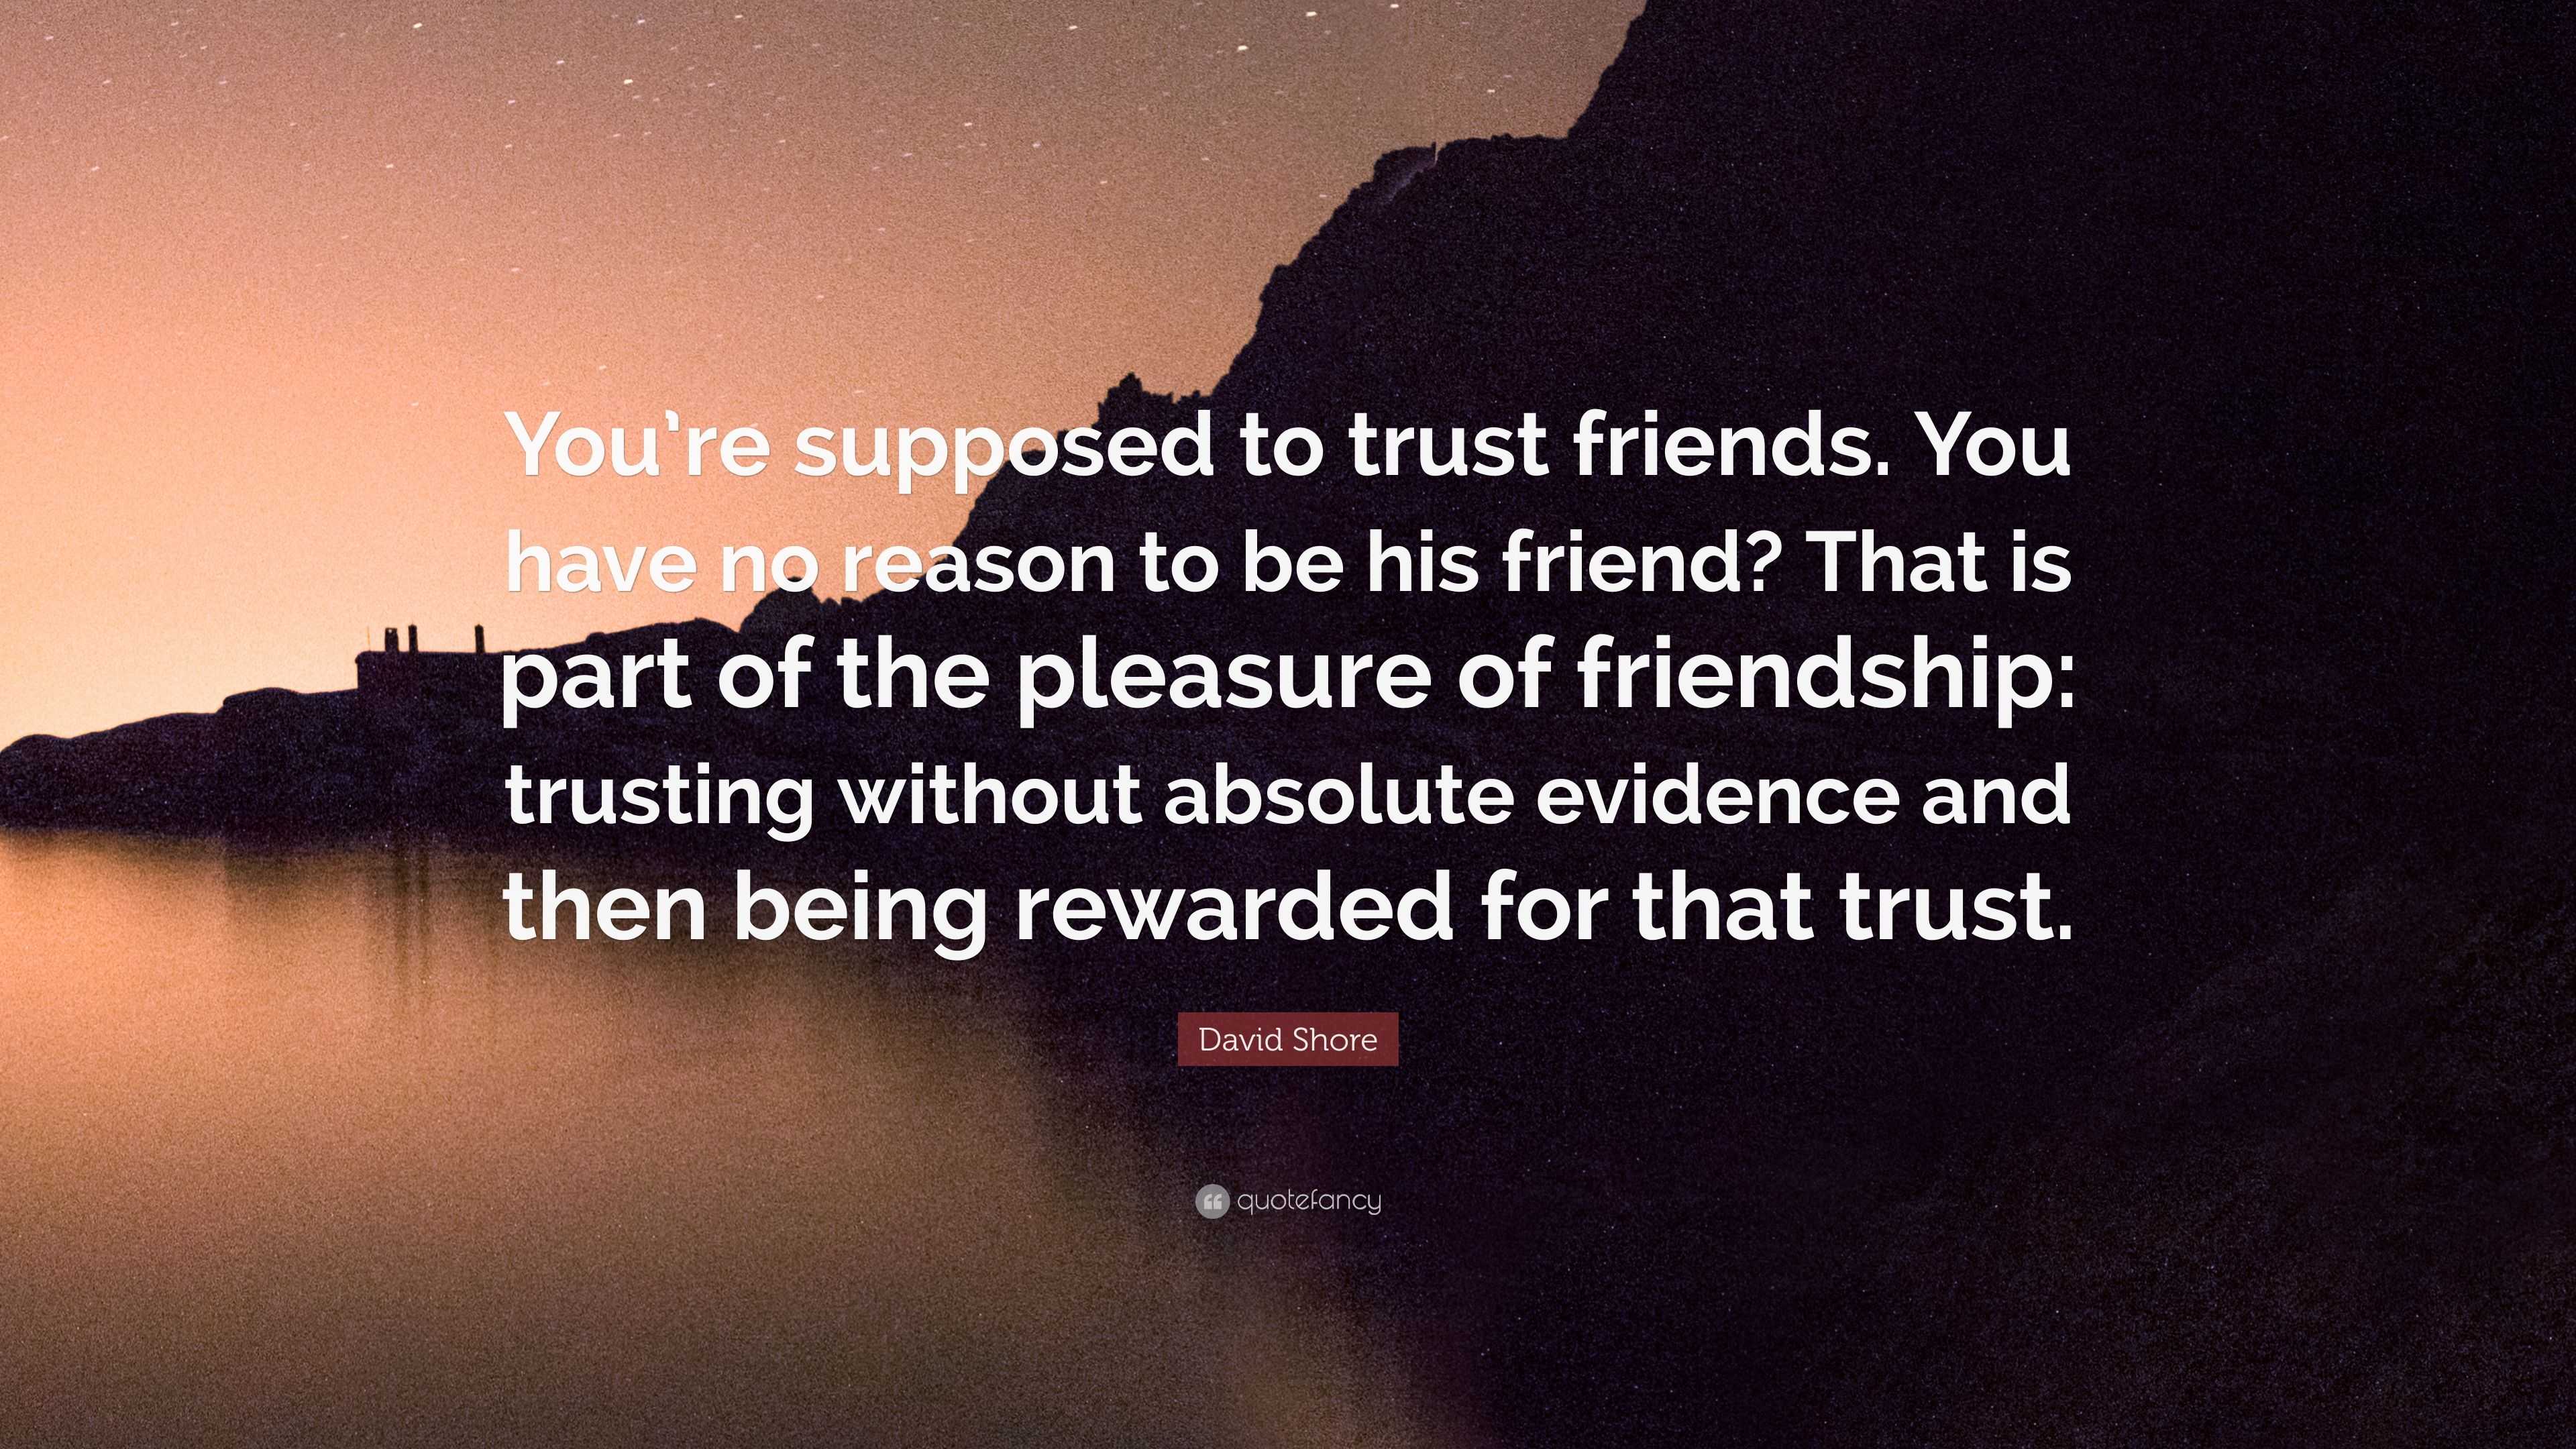 David Shore Quote: “You’re supposed to trust friends. You have no